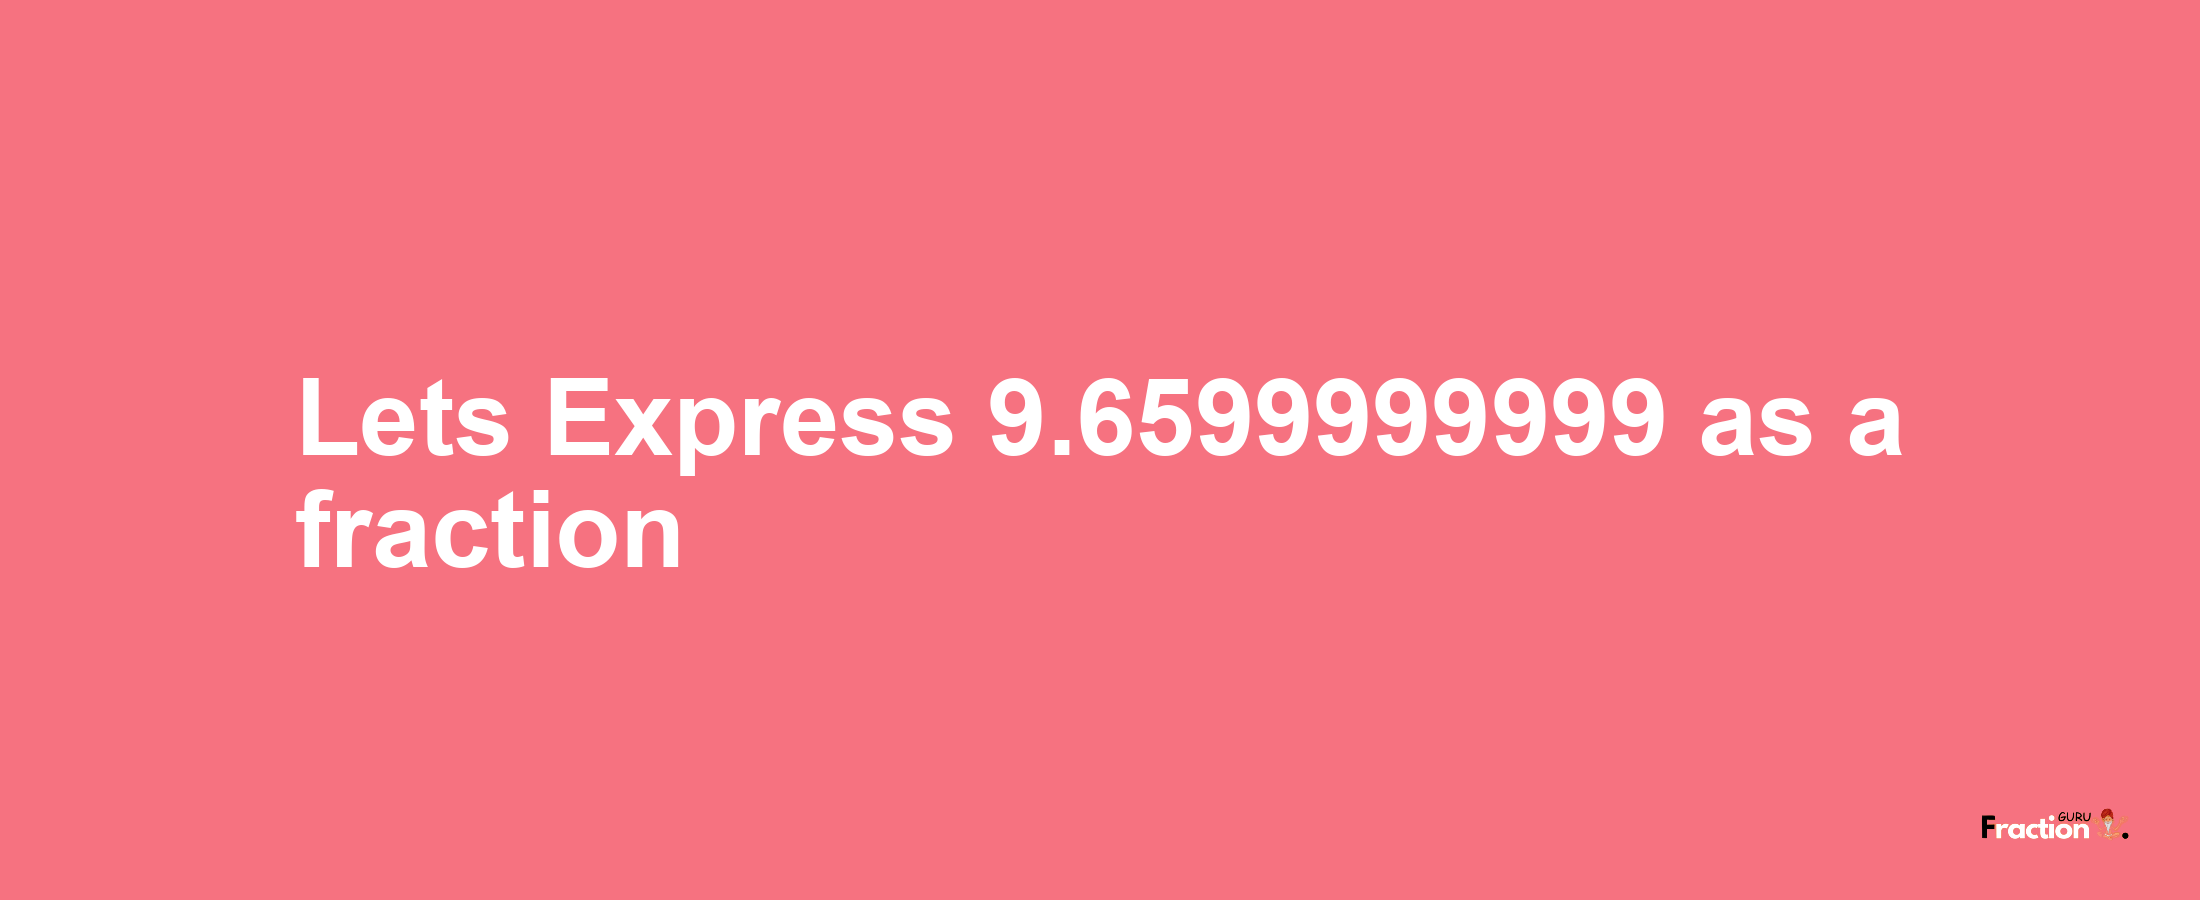 Lets Express 9.6599999999 as afraction